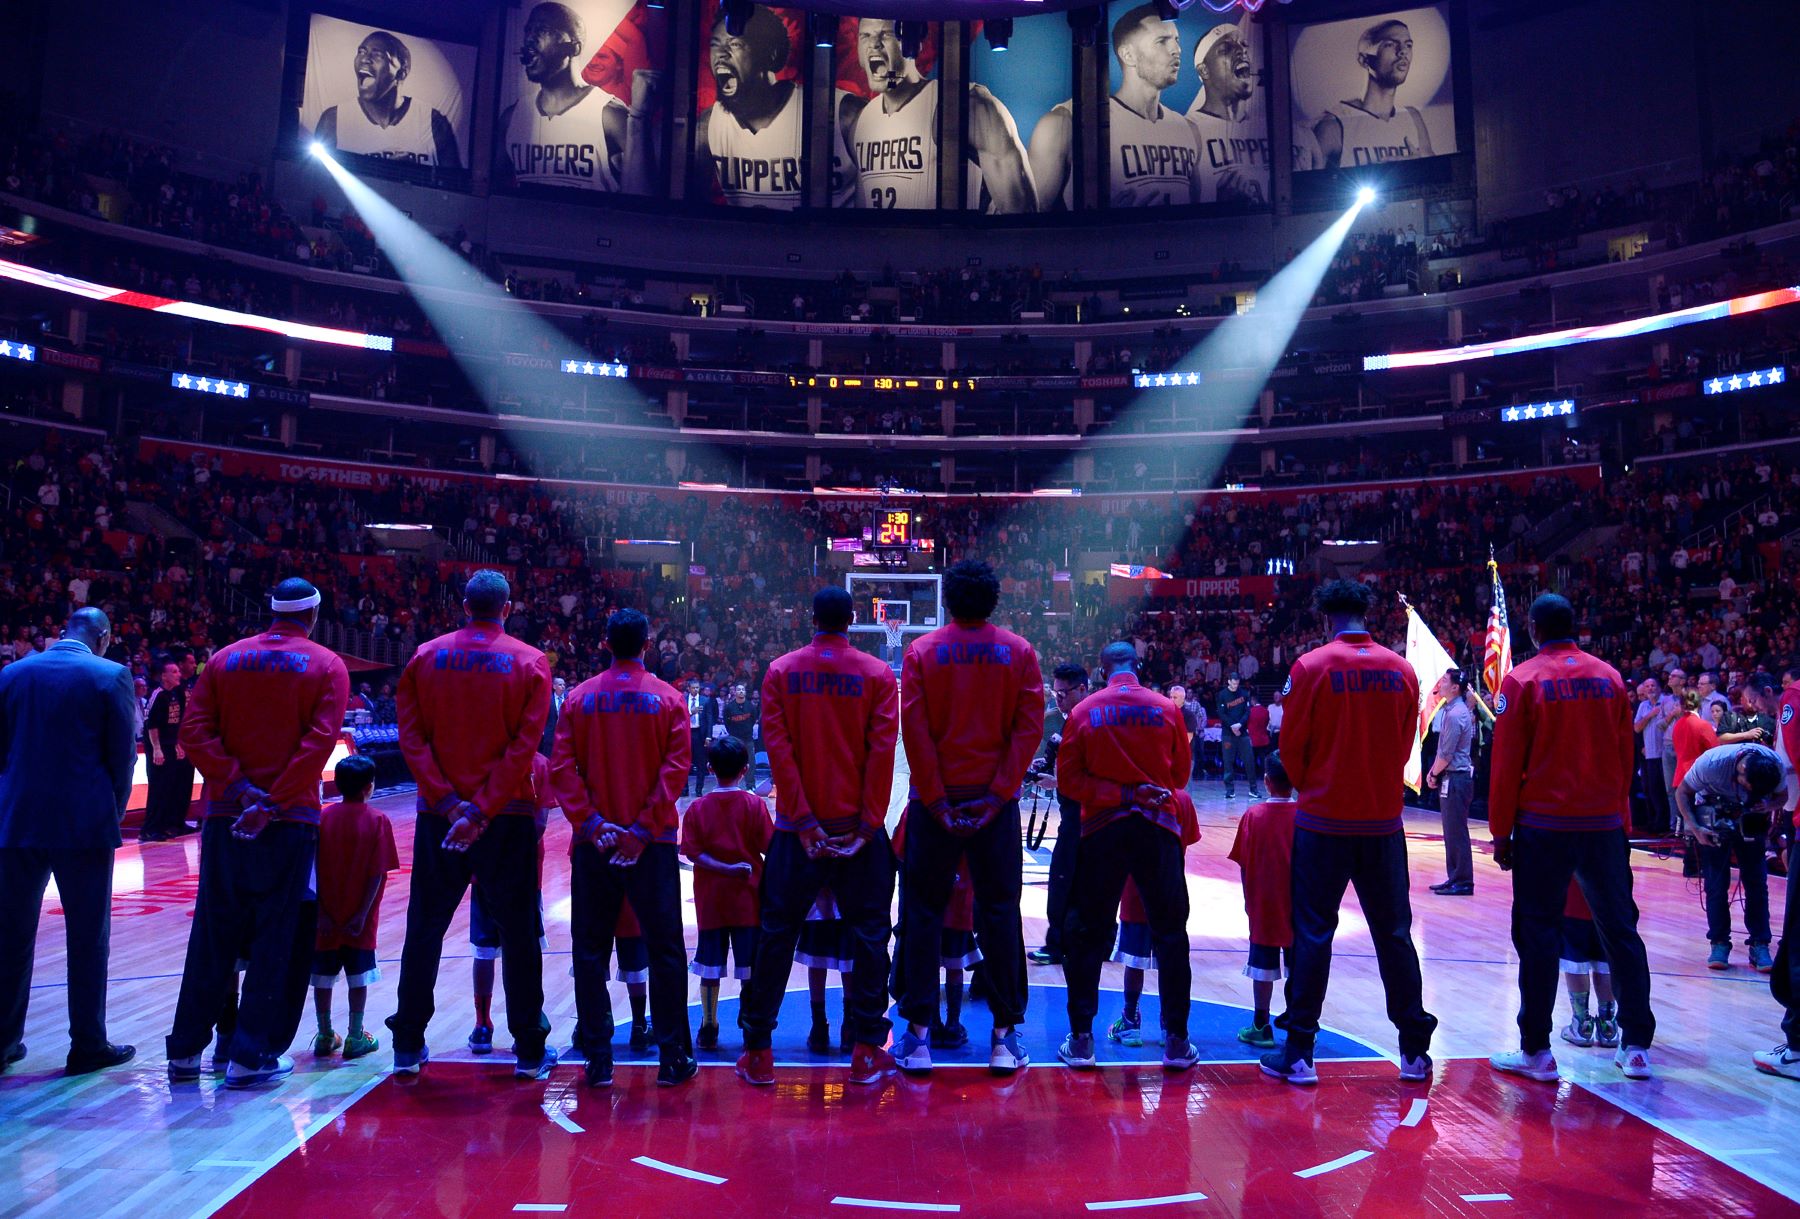 NBA players of the Los Angeles Clippers lineup for the national anthem before a game against the Phoenix Suns